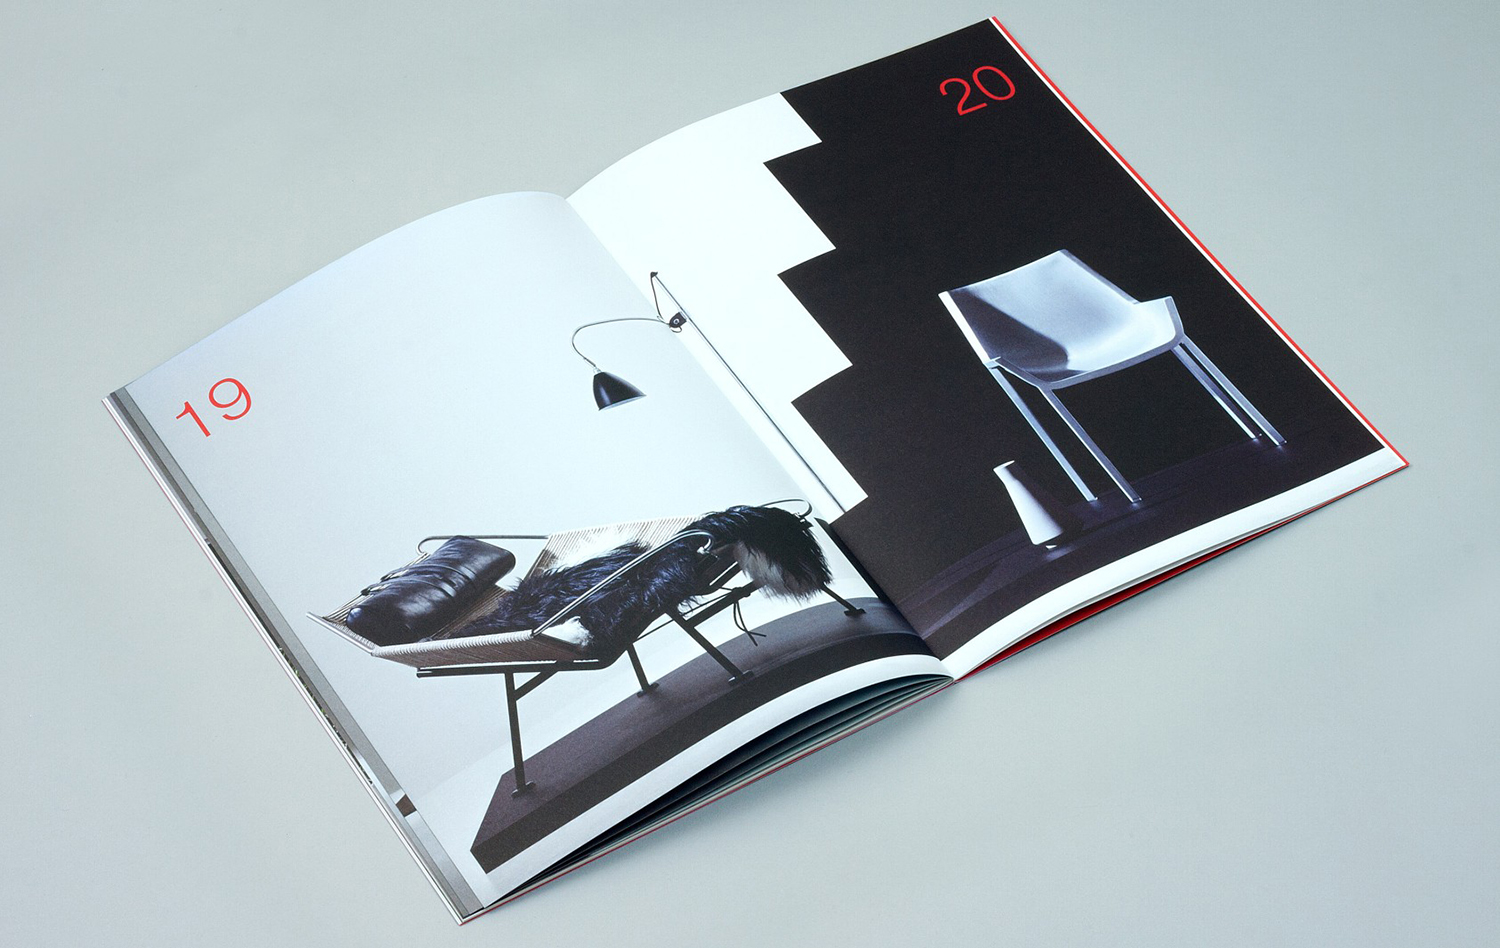 Event and exhibition identity designed by Toko celebrating the 20 year anniversary of designer furniture retailer Cult